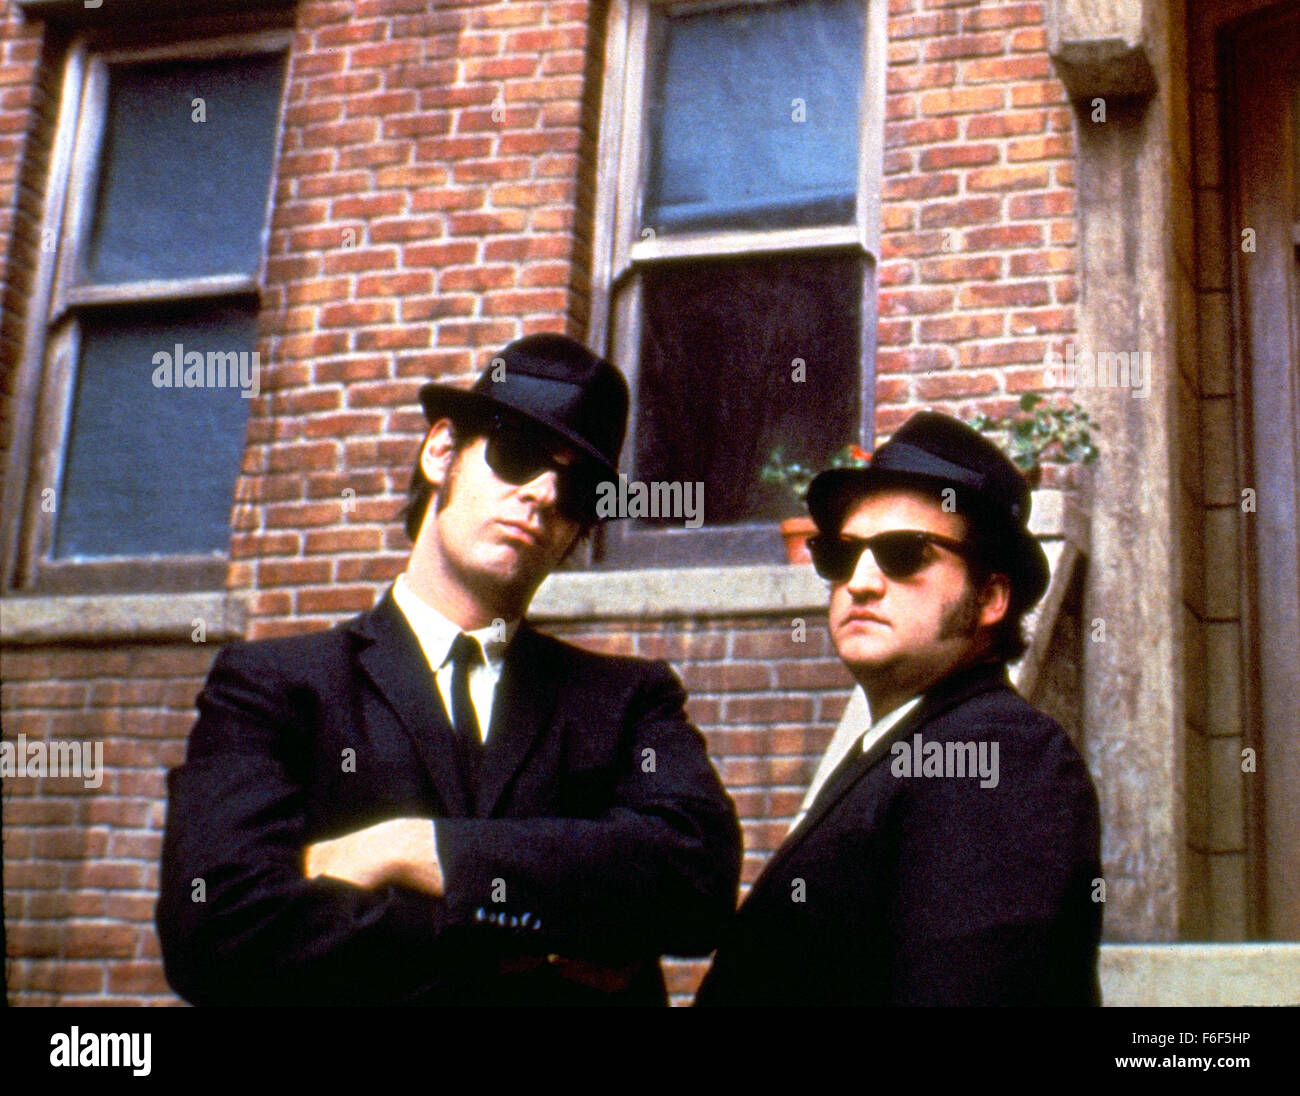 RELEASE DATE: June 20, 1980  MOVIE TITLE: The Blues Brothers  STUDIO: Universal Pictures  DIRECTOR: John Landis  PLOT: Jake Blues, just out from prison, puts together his old band to save the Catholic home where he and brother Elwood were raised  PICTURED: DAN AYKROYD and JOHN BELUSHI star as Elwood Blues and 'Joliet' Jake Blues   (Credit Image: c Universal Pictures/Entertainment Pictures) Stock Photo